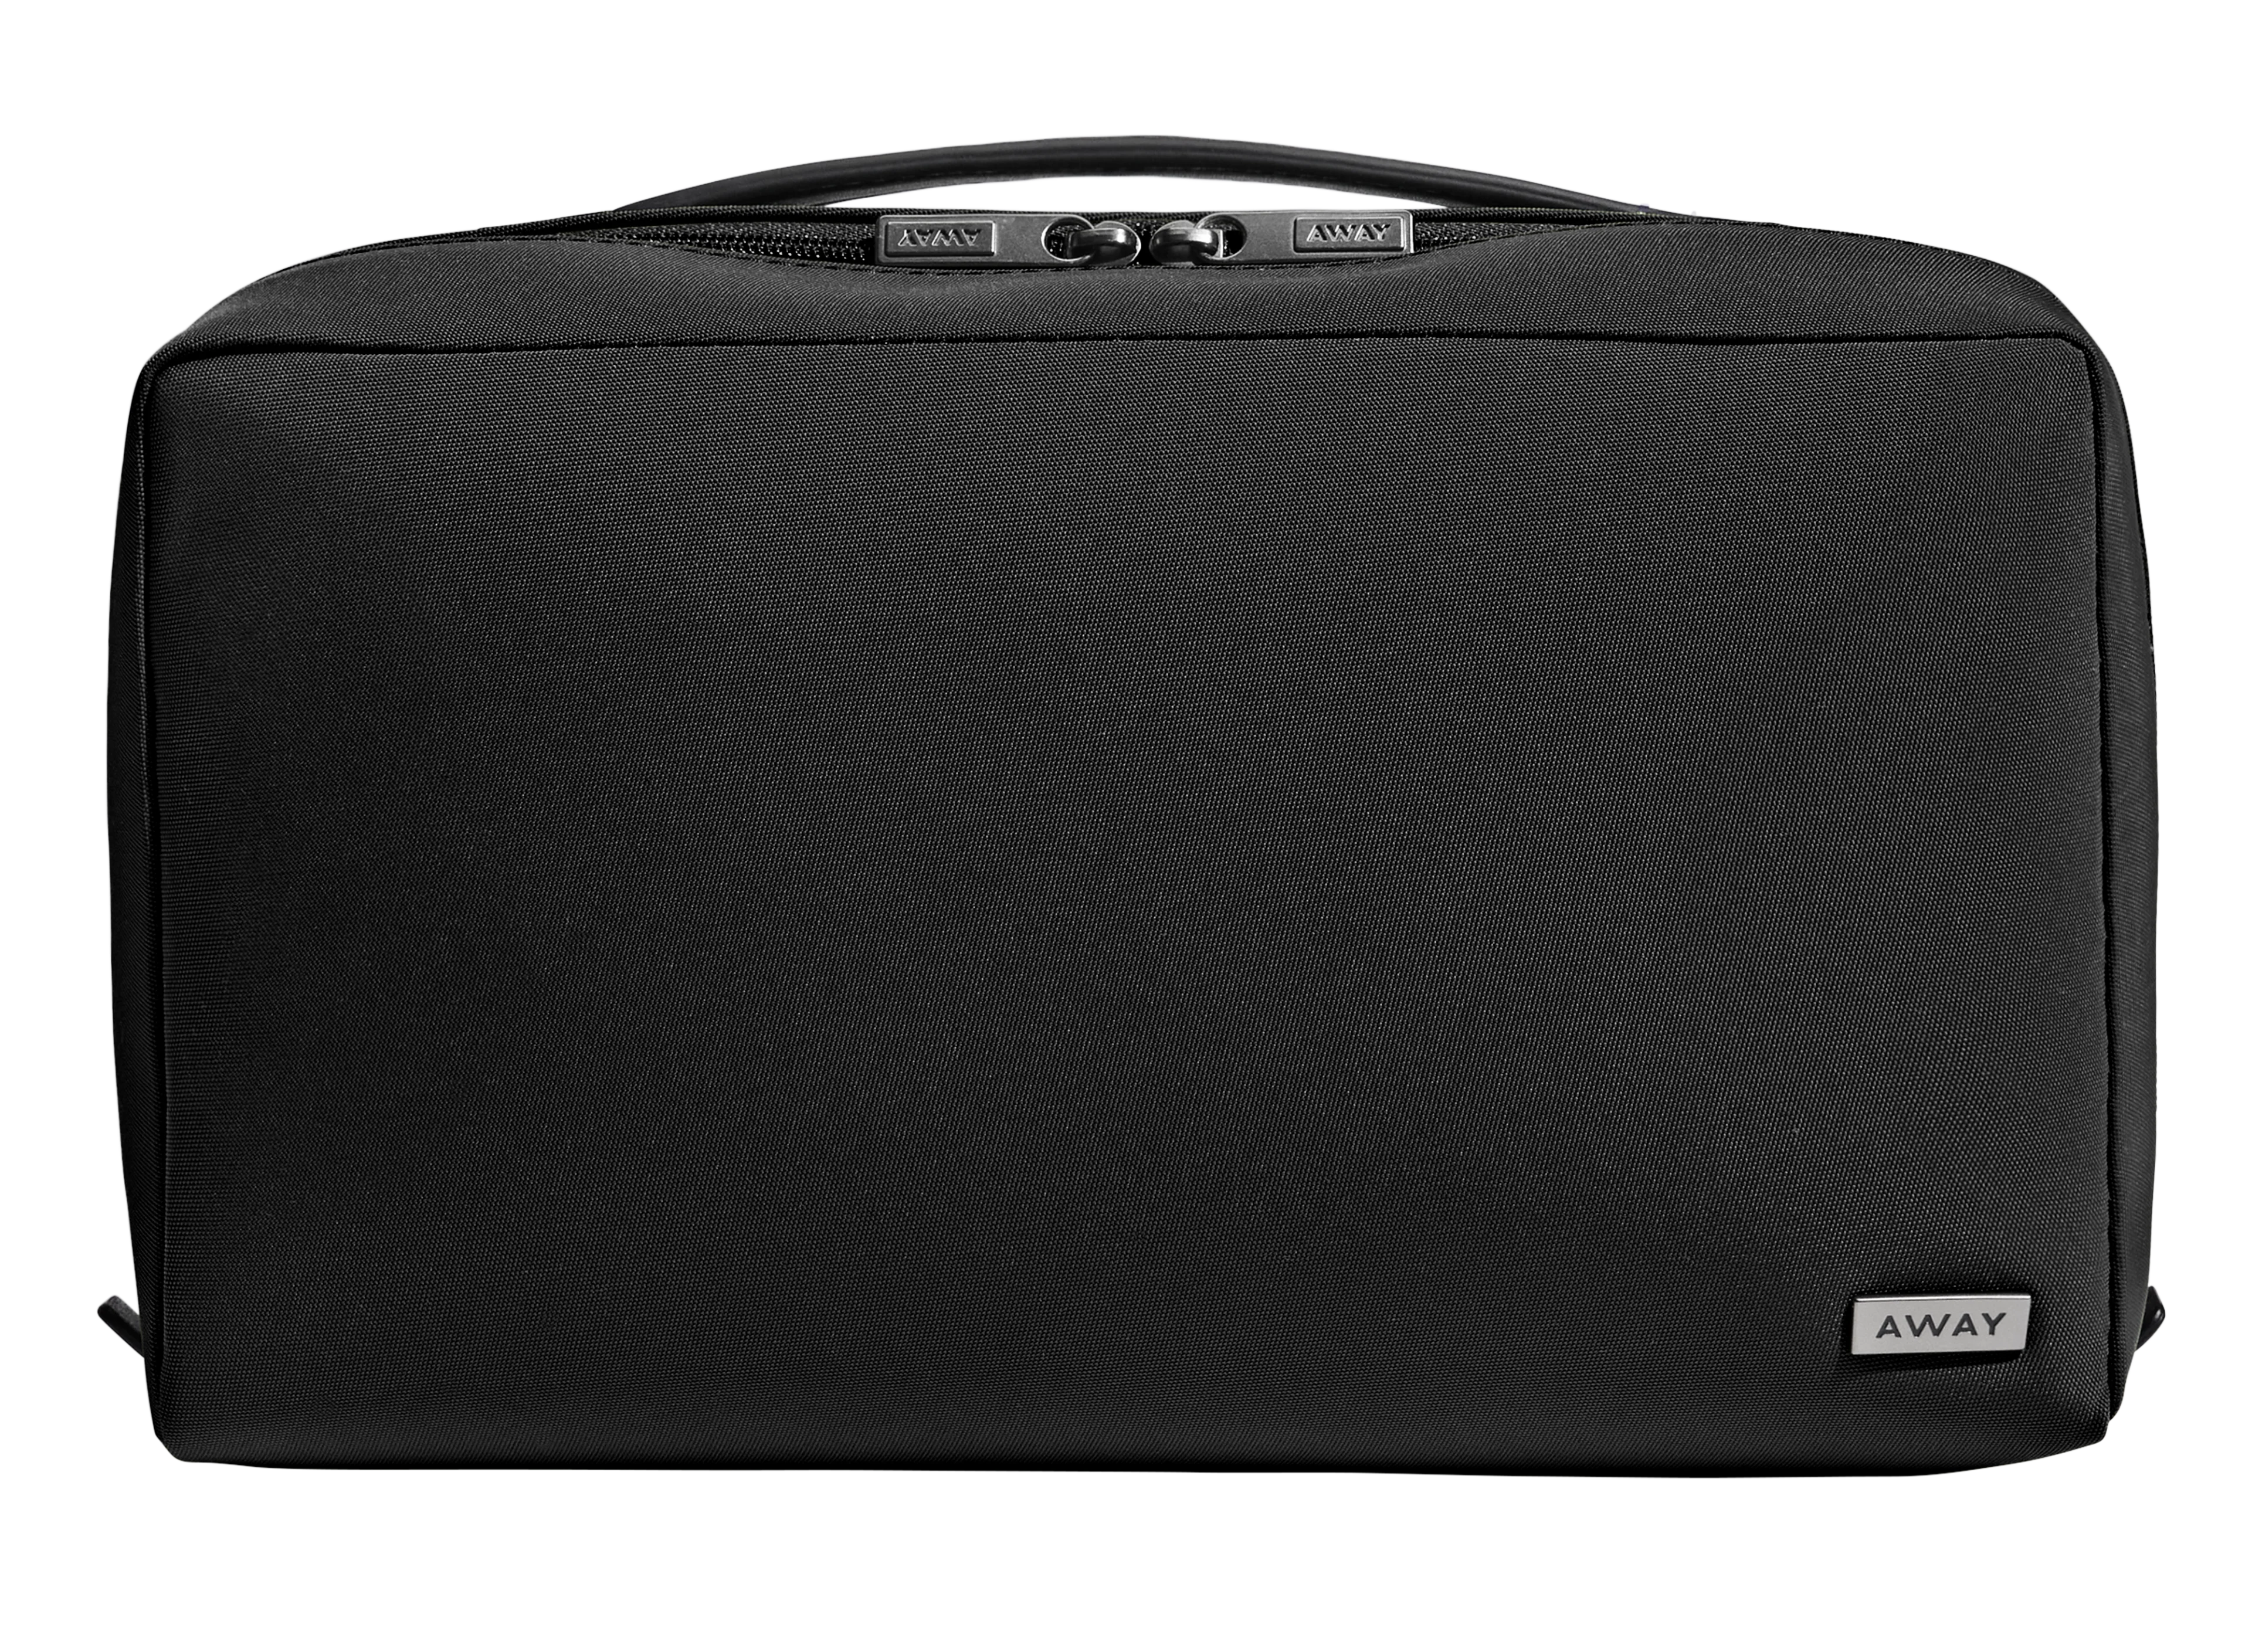 The Large Toiletry Bag Black